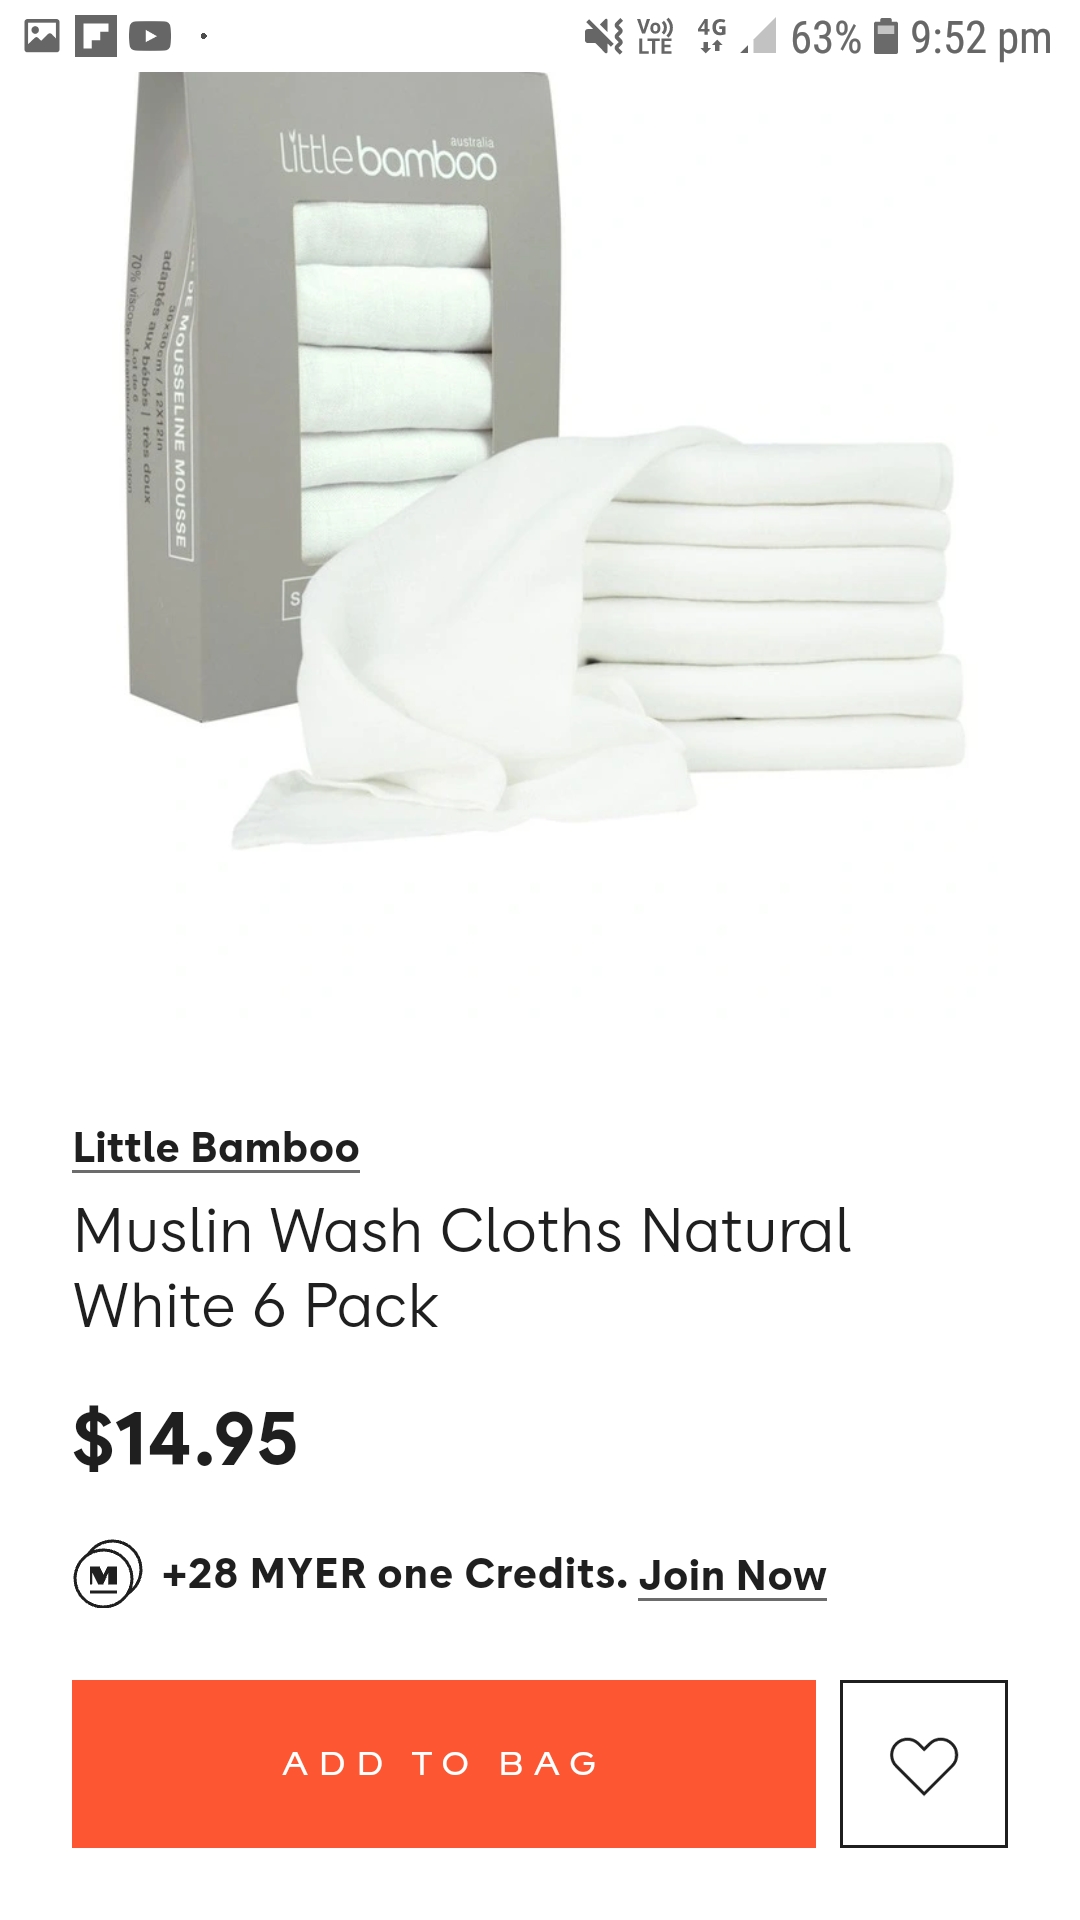 Muslin wash clothes 6pack